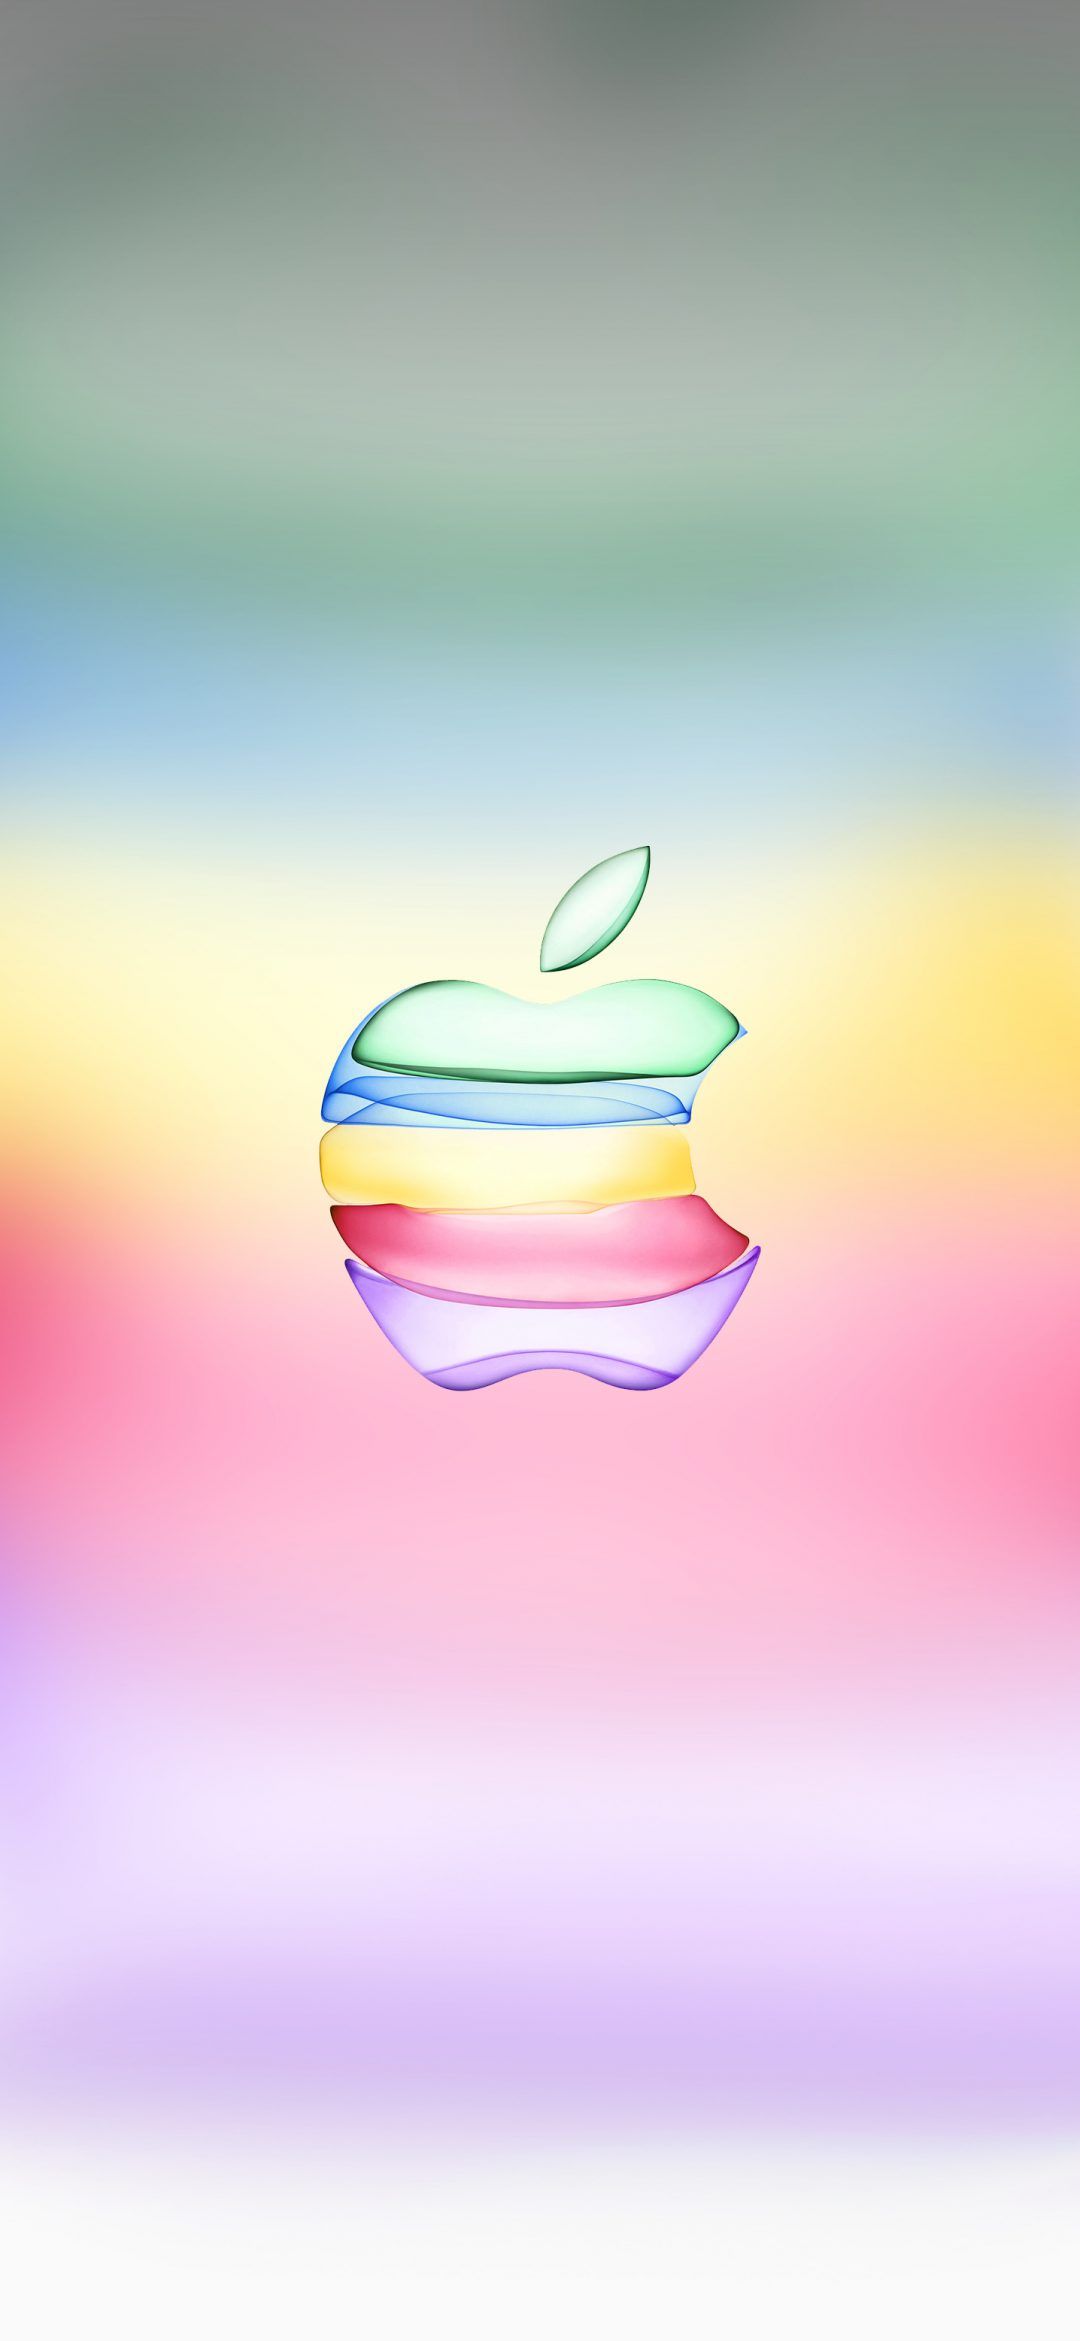 Download Apple iPhone 11 / iPhone 11 Pro Official Stock Wallpaper [4K + QHD]